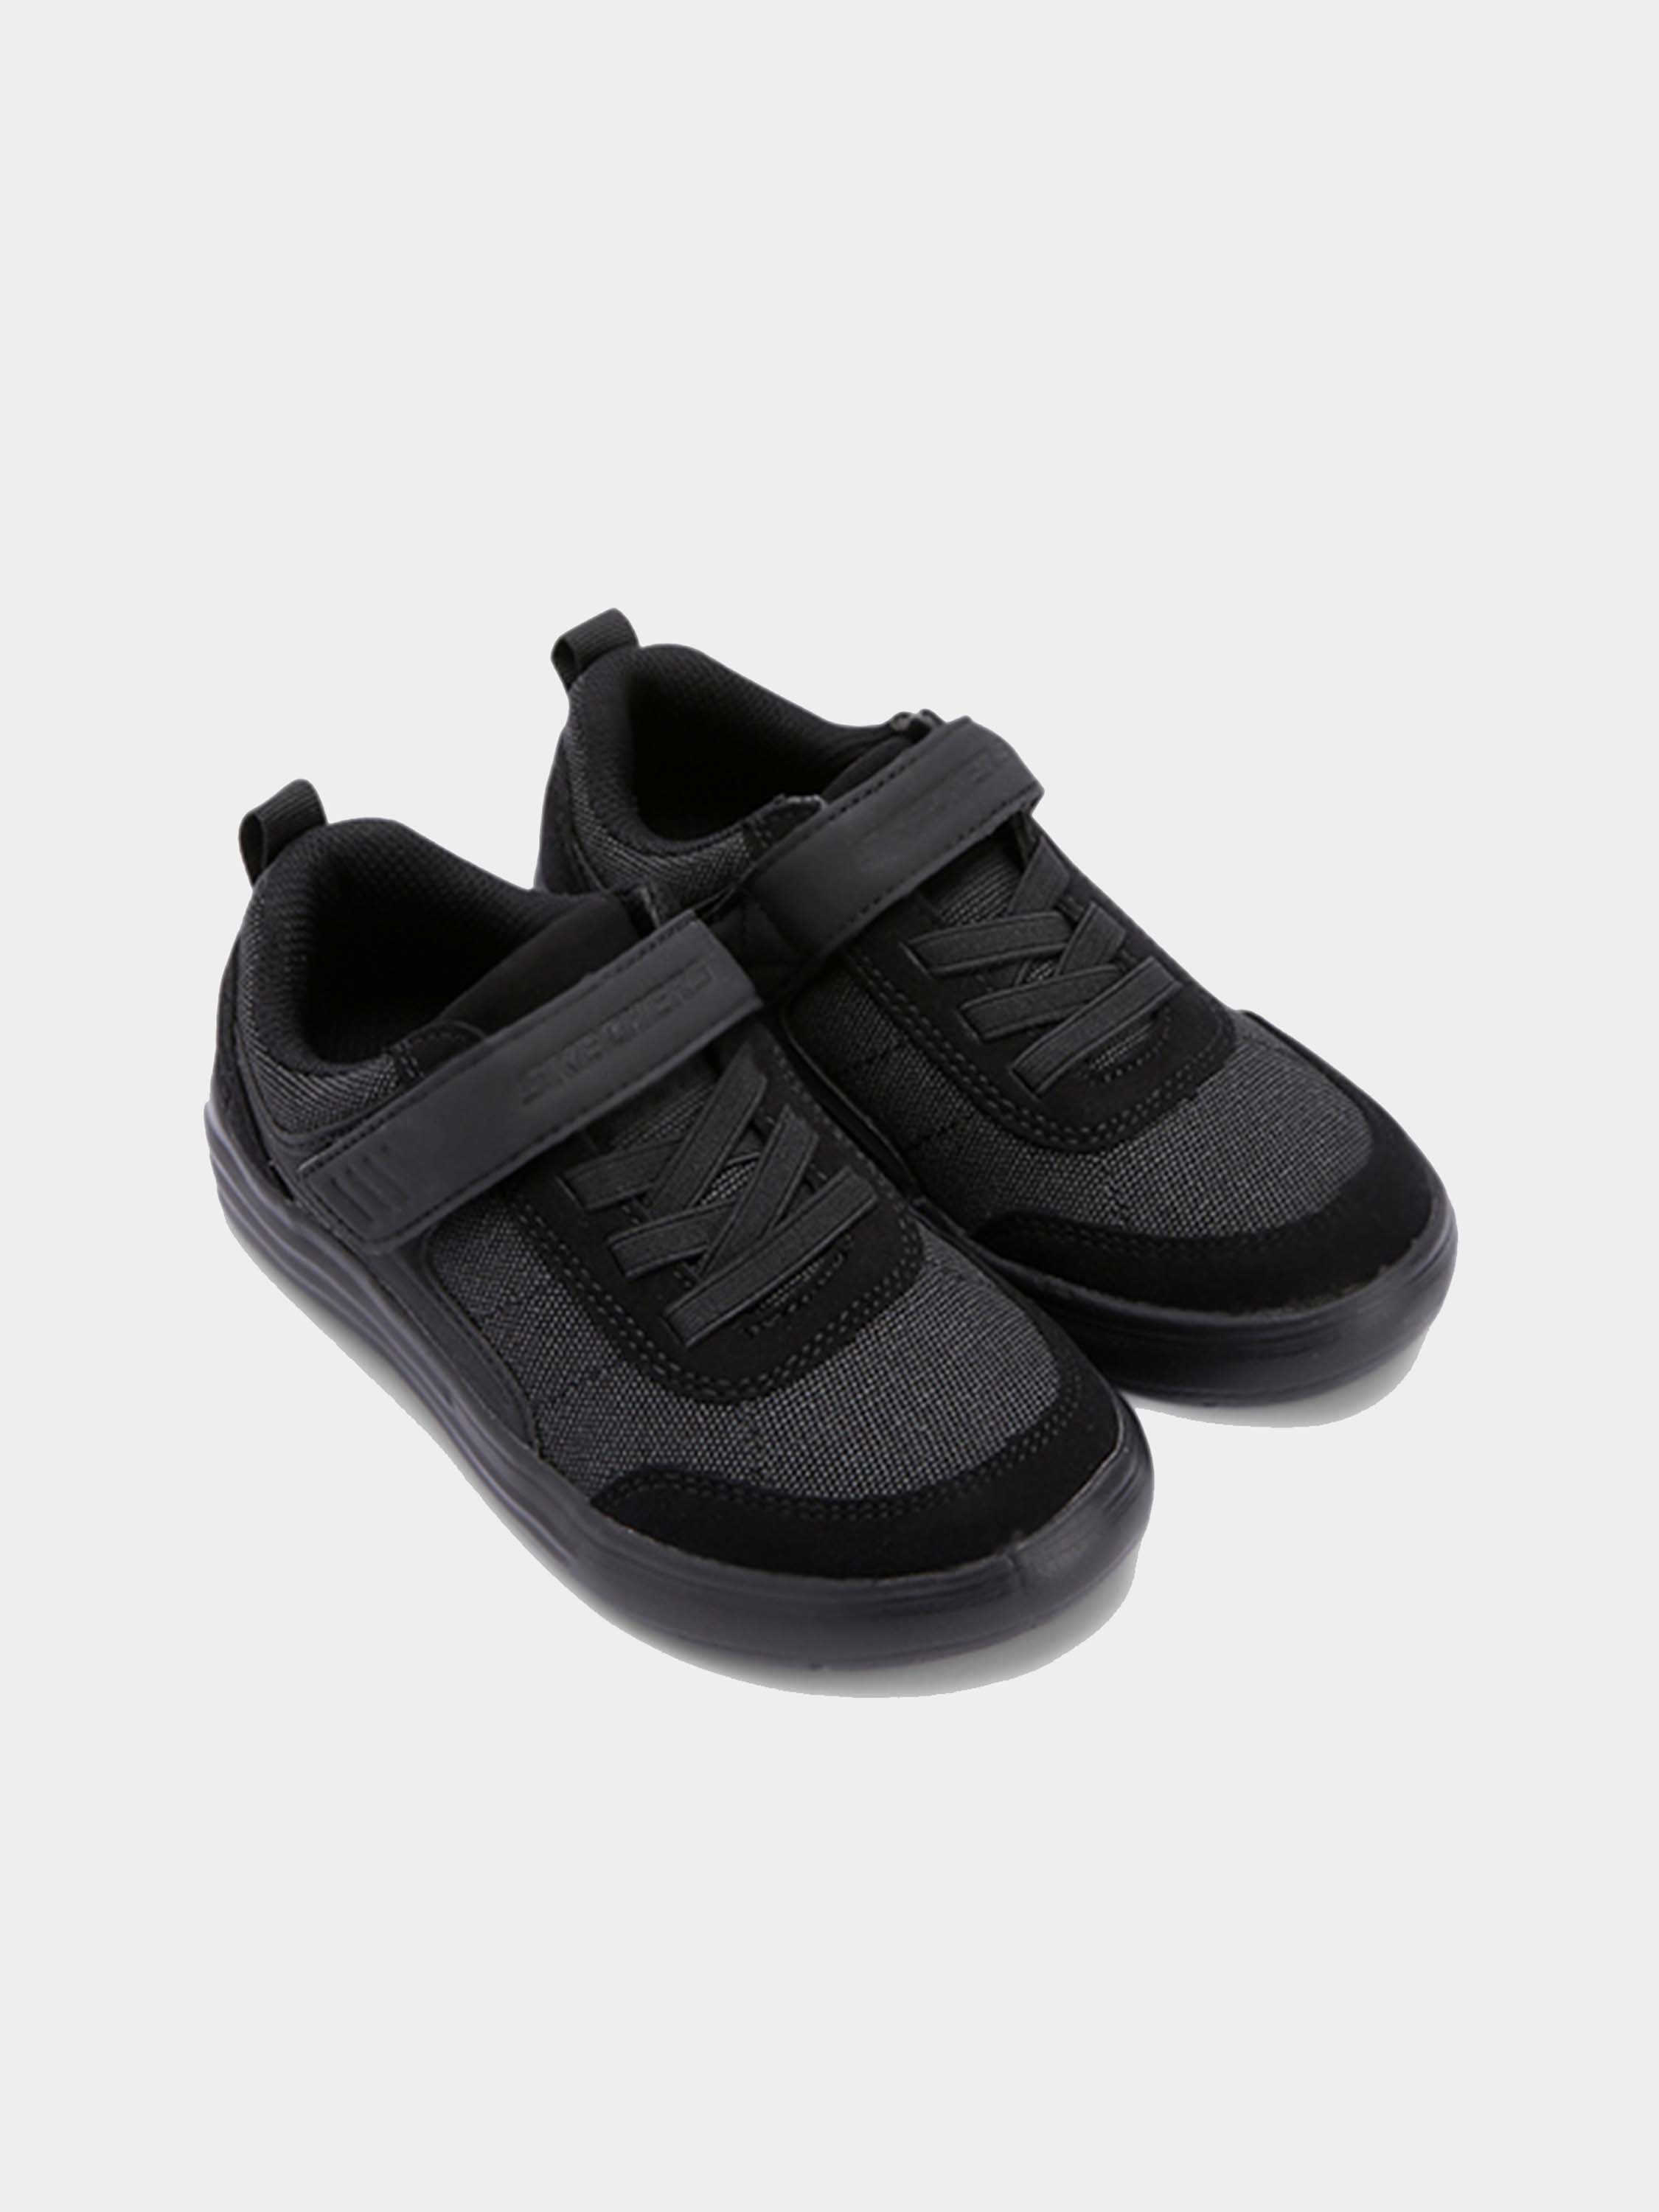 Skechers Boys Maddox - Street Shifter Shoes #color_Black